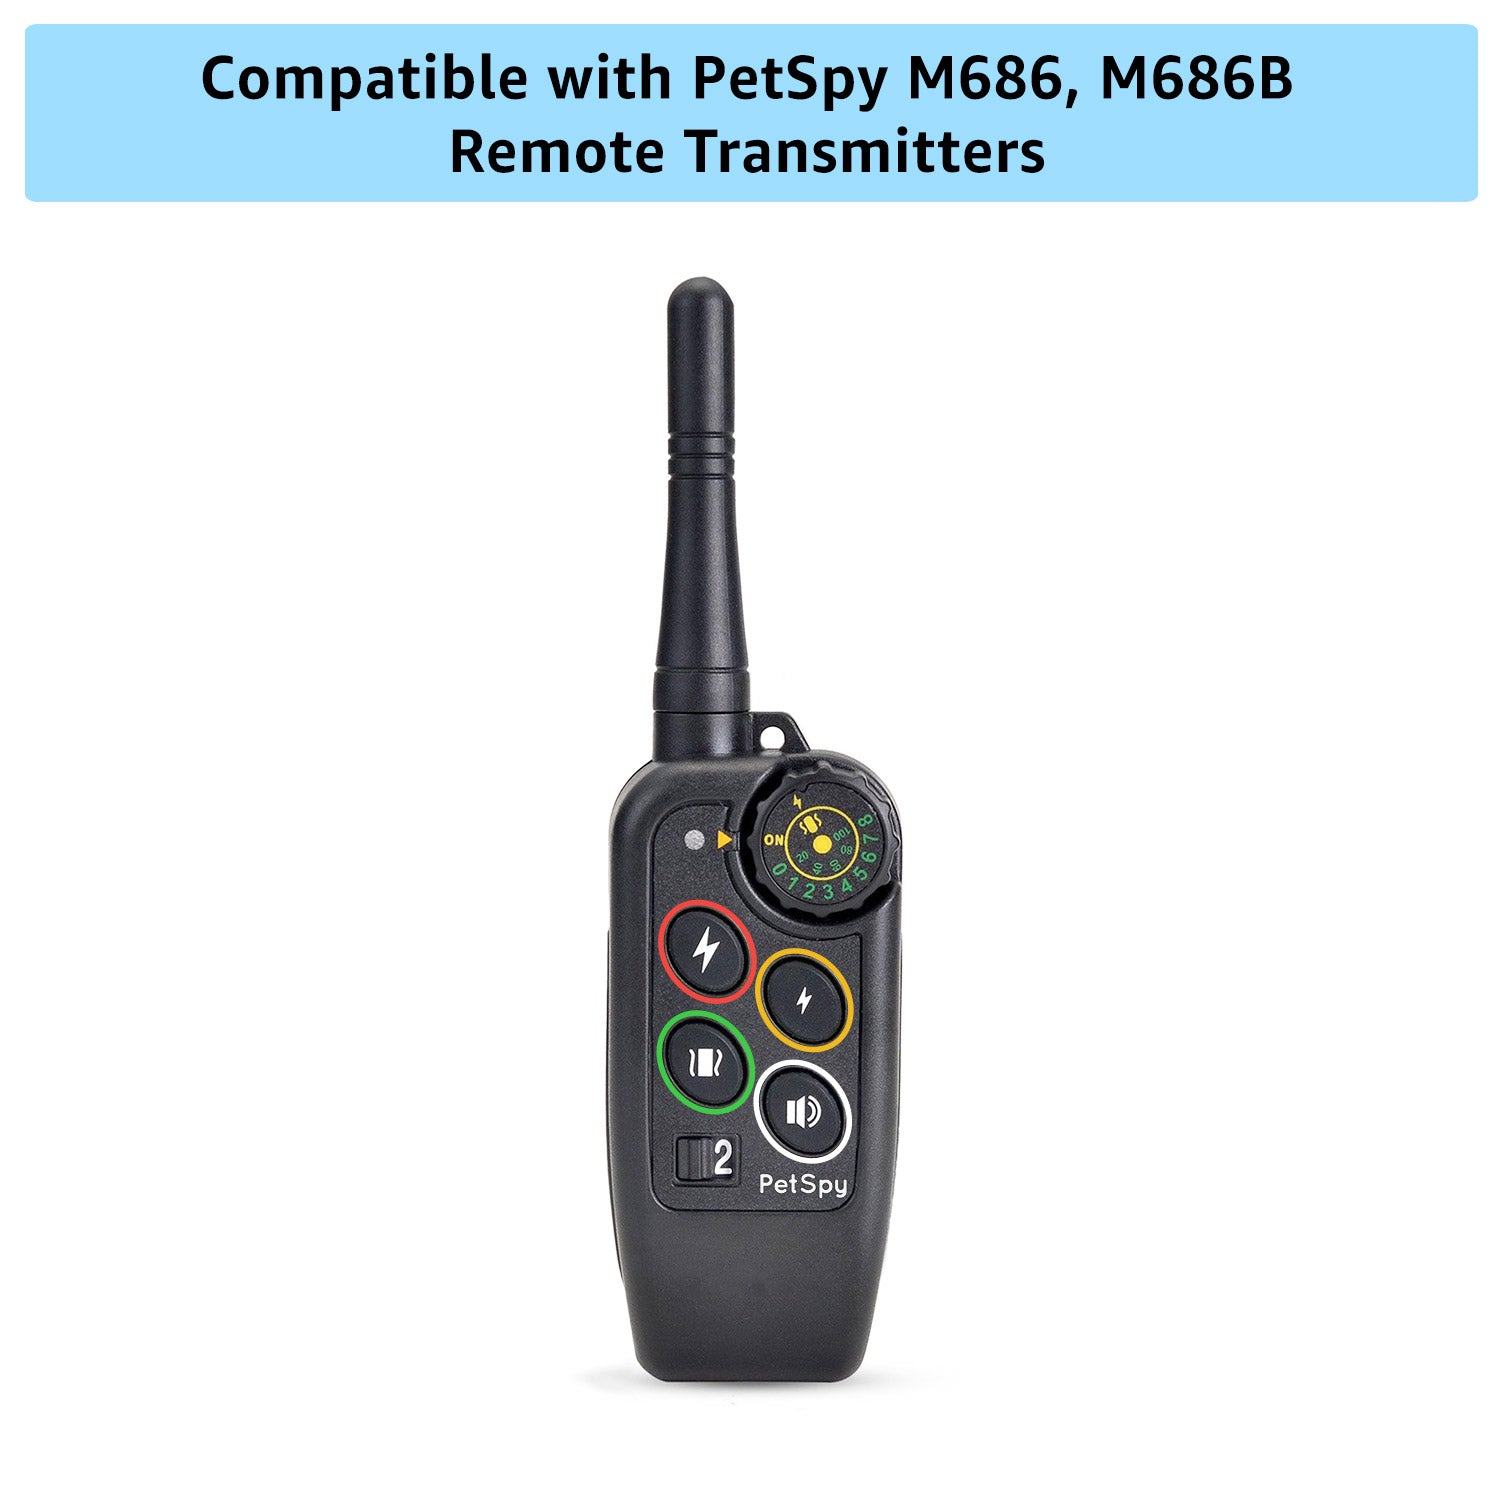 M686 Extra Antenna_compatible with petspy M686 M686B remote transmitters